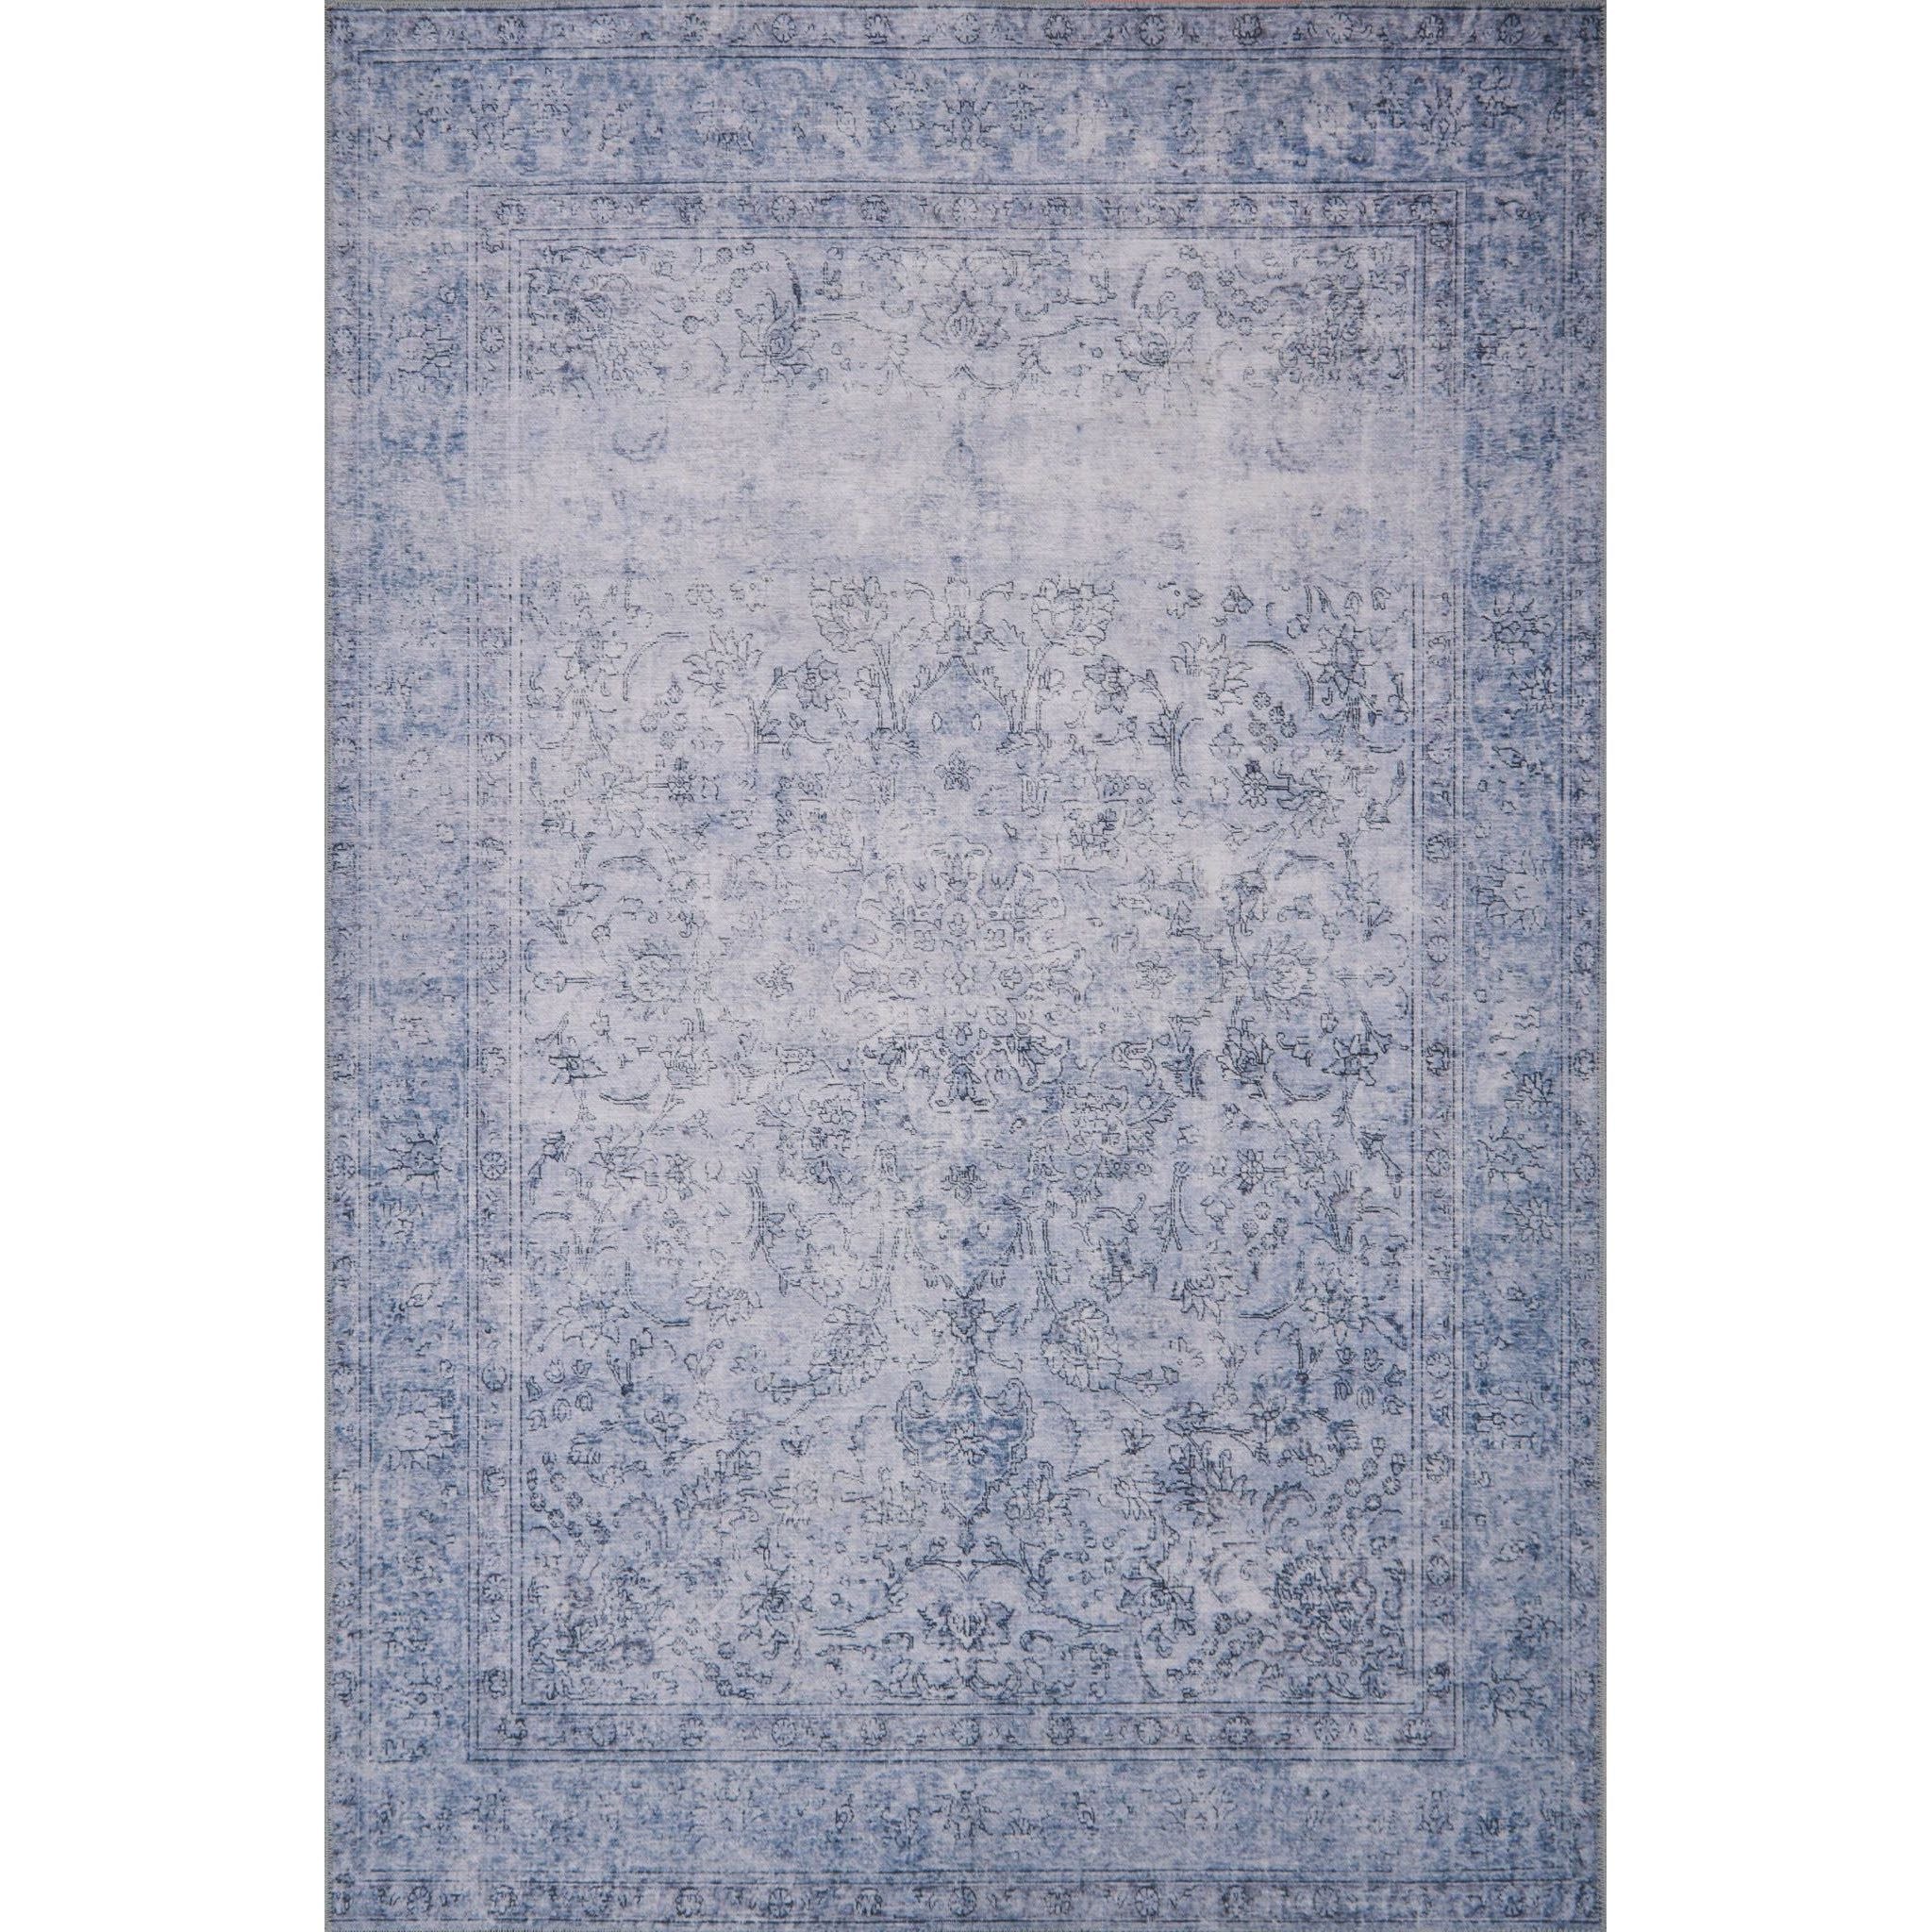 Loren Slate Rug - Amethyst Home Timeless and classic, the Loren Collection offers vintage hand-knotted looks at an affordable price. Created in Turkey using the most advanced rug-making technology, these printed designs provide a textured effect by portraying every single individual knot on a soft polyester base.